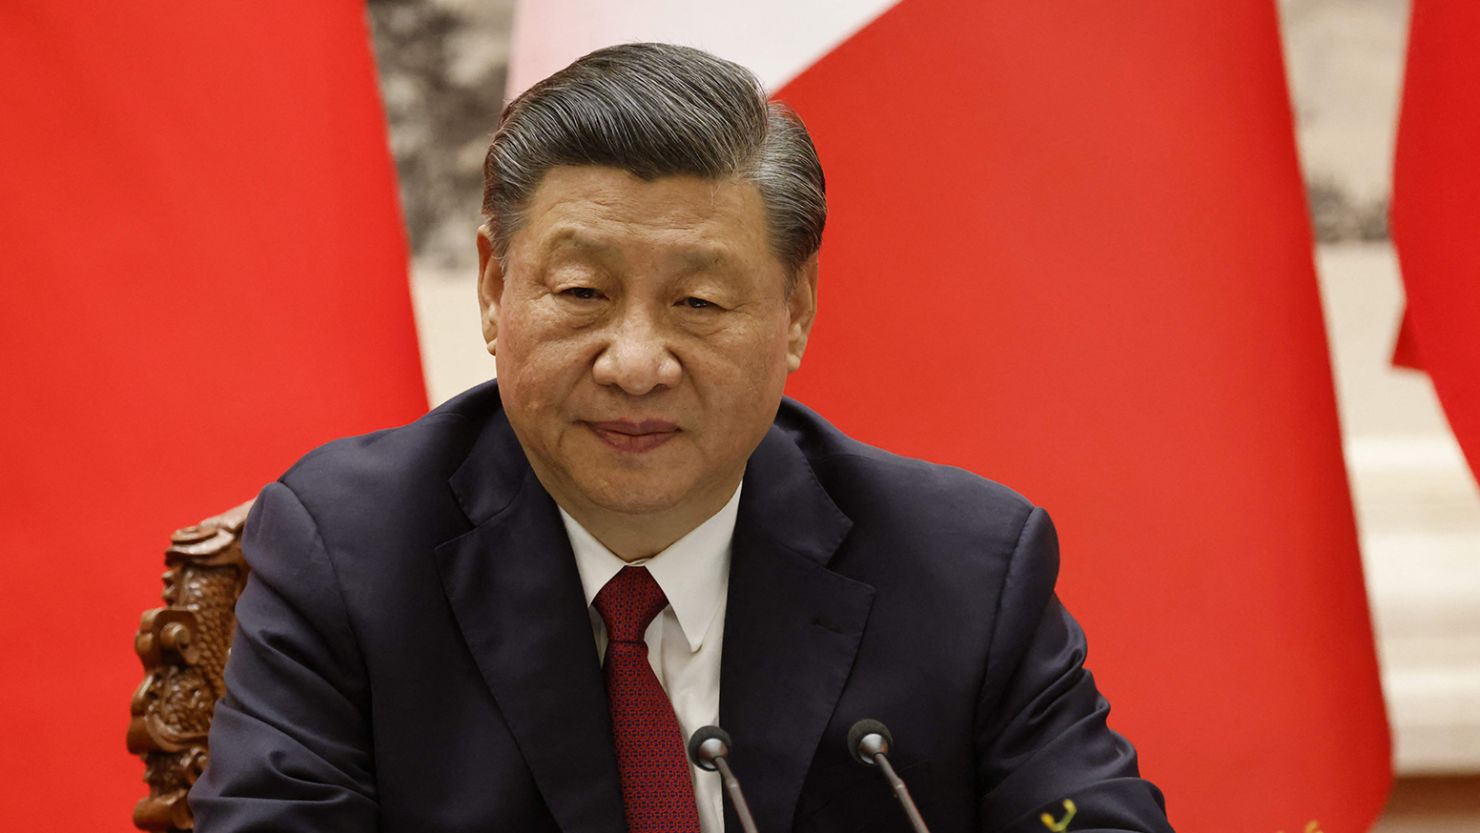 China's leader Xi Jinping has made national security a top priority during his decade in power.